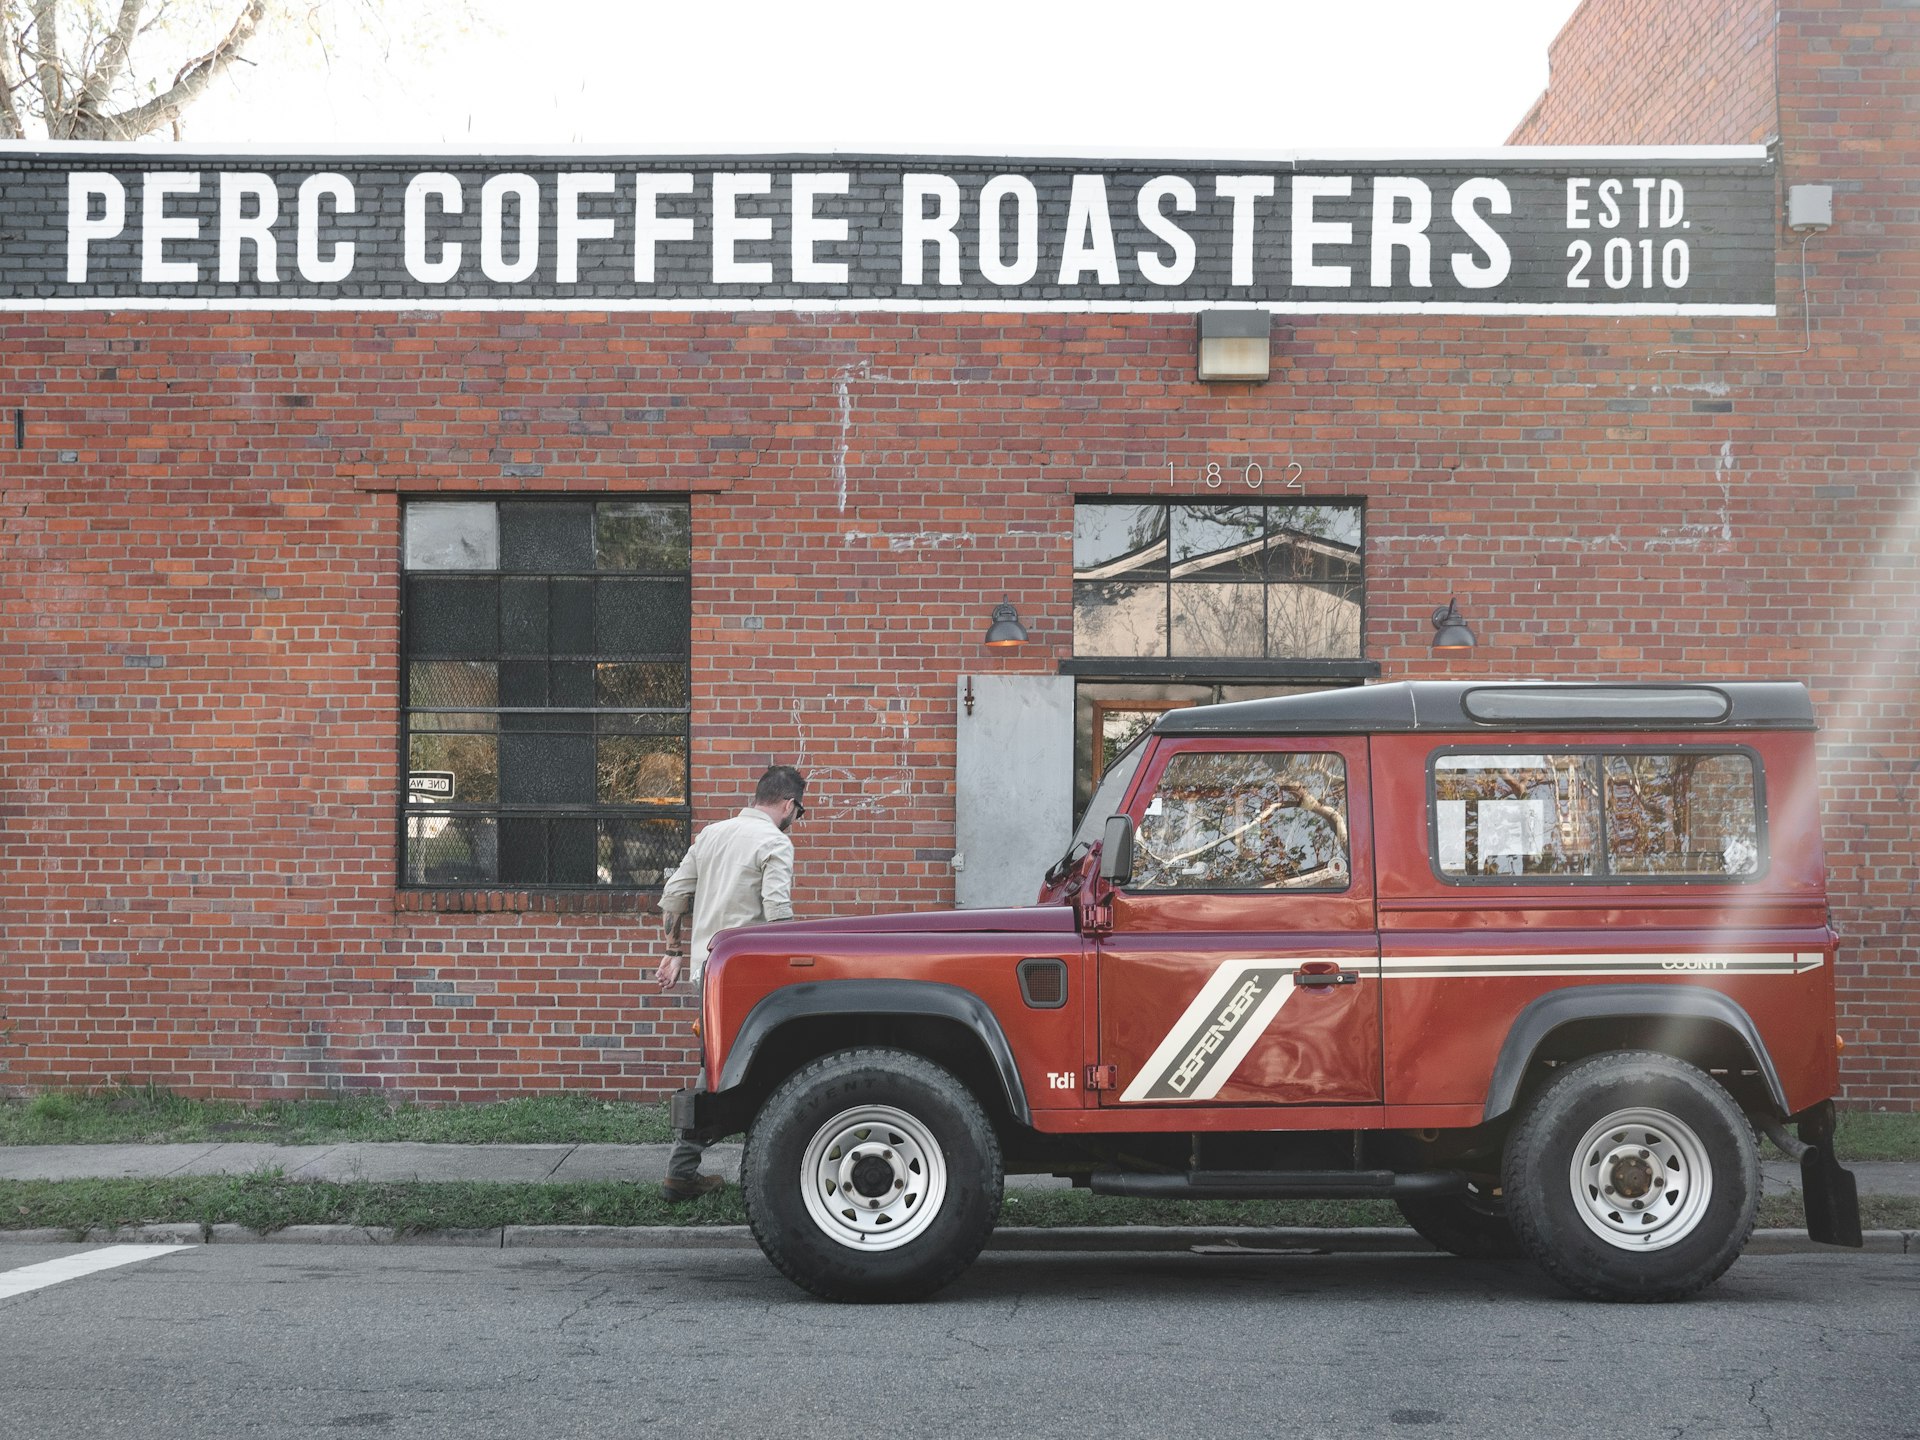 A red Land Rover Defender is parked in front of the red brick facade of Perc Coffee Roasters.